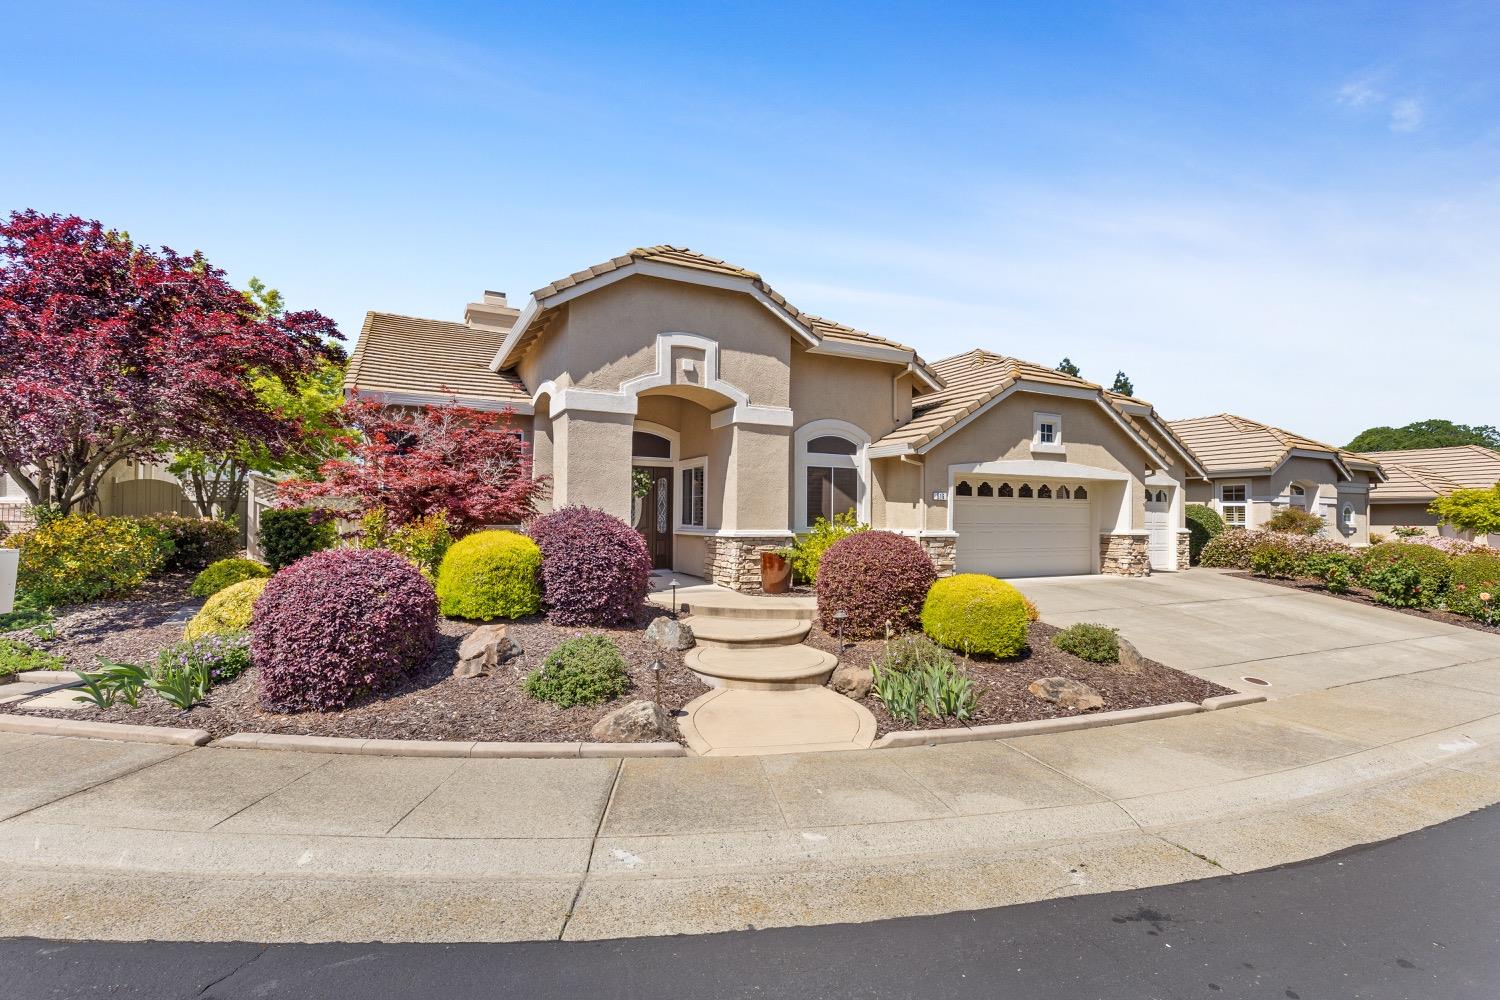 Photo of 516 Cold Stream Ct in Roseville, CA